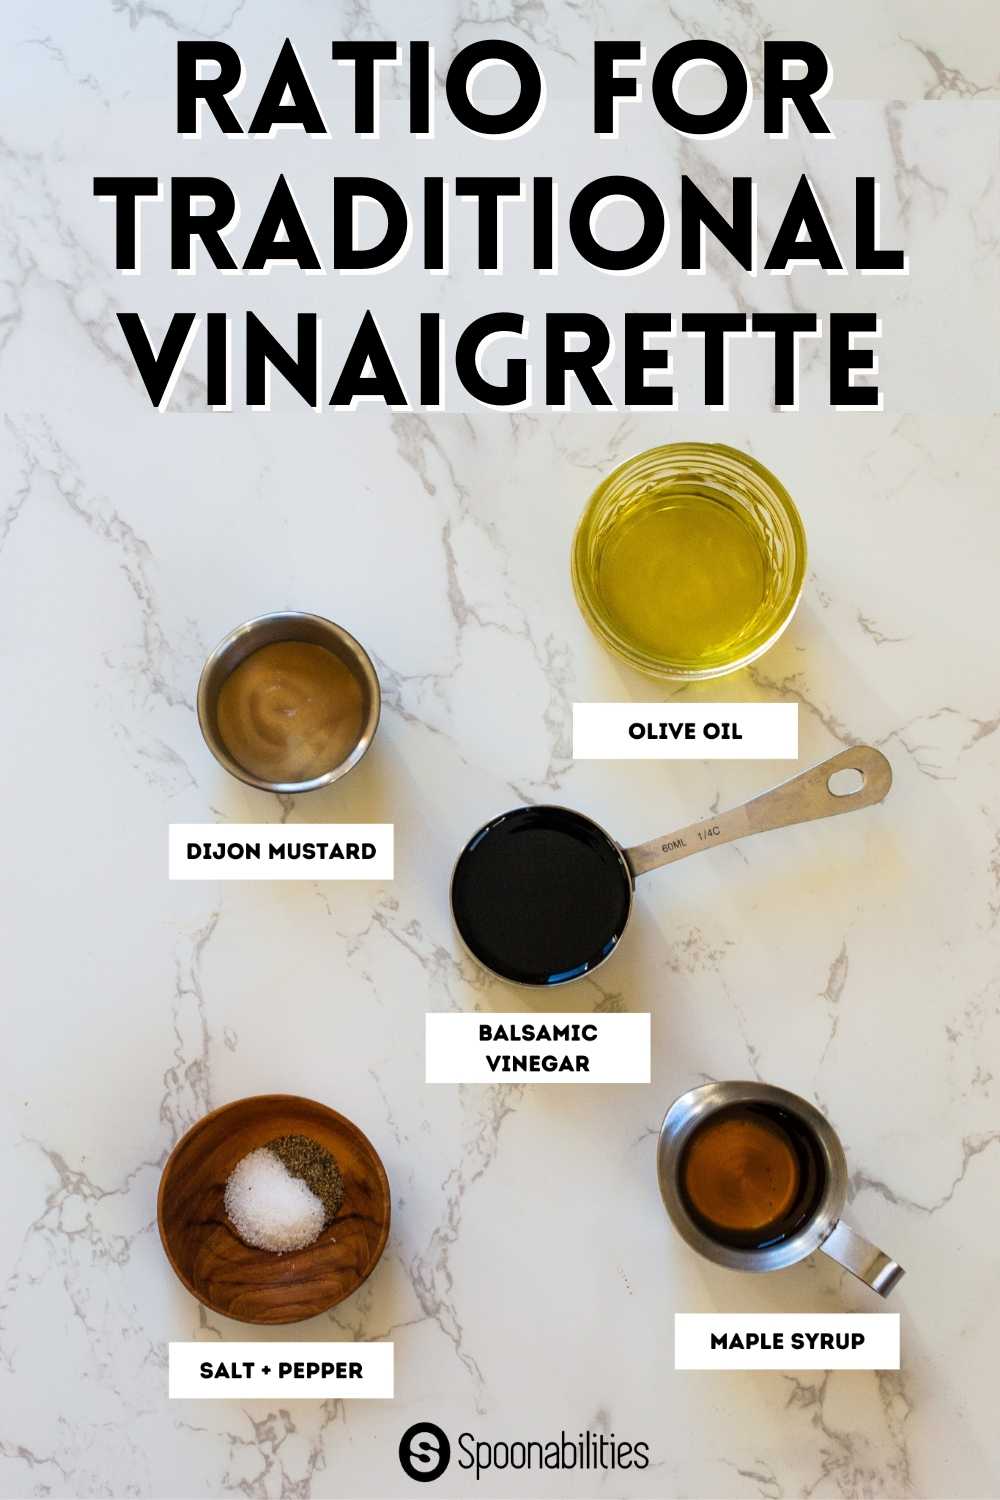 A photo of traditional vinaigrette ingredients in different containers